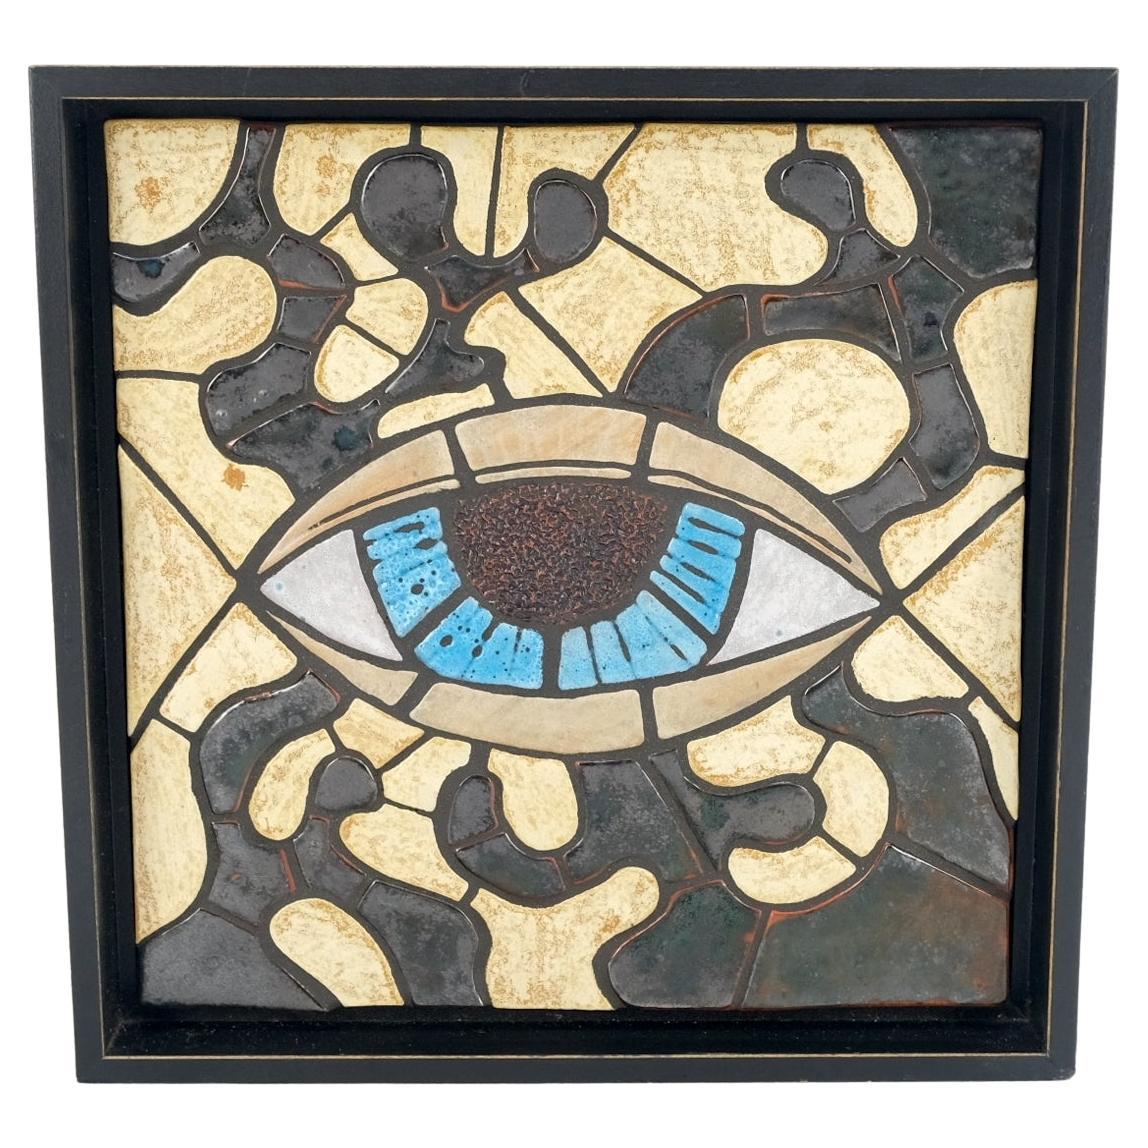 Modern wall art sculpture by Donald C. Rattino

This work has been featured in several juried art shows since its inception and most recently shown at The Chicago Museum of Contemporary Mosaics 